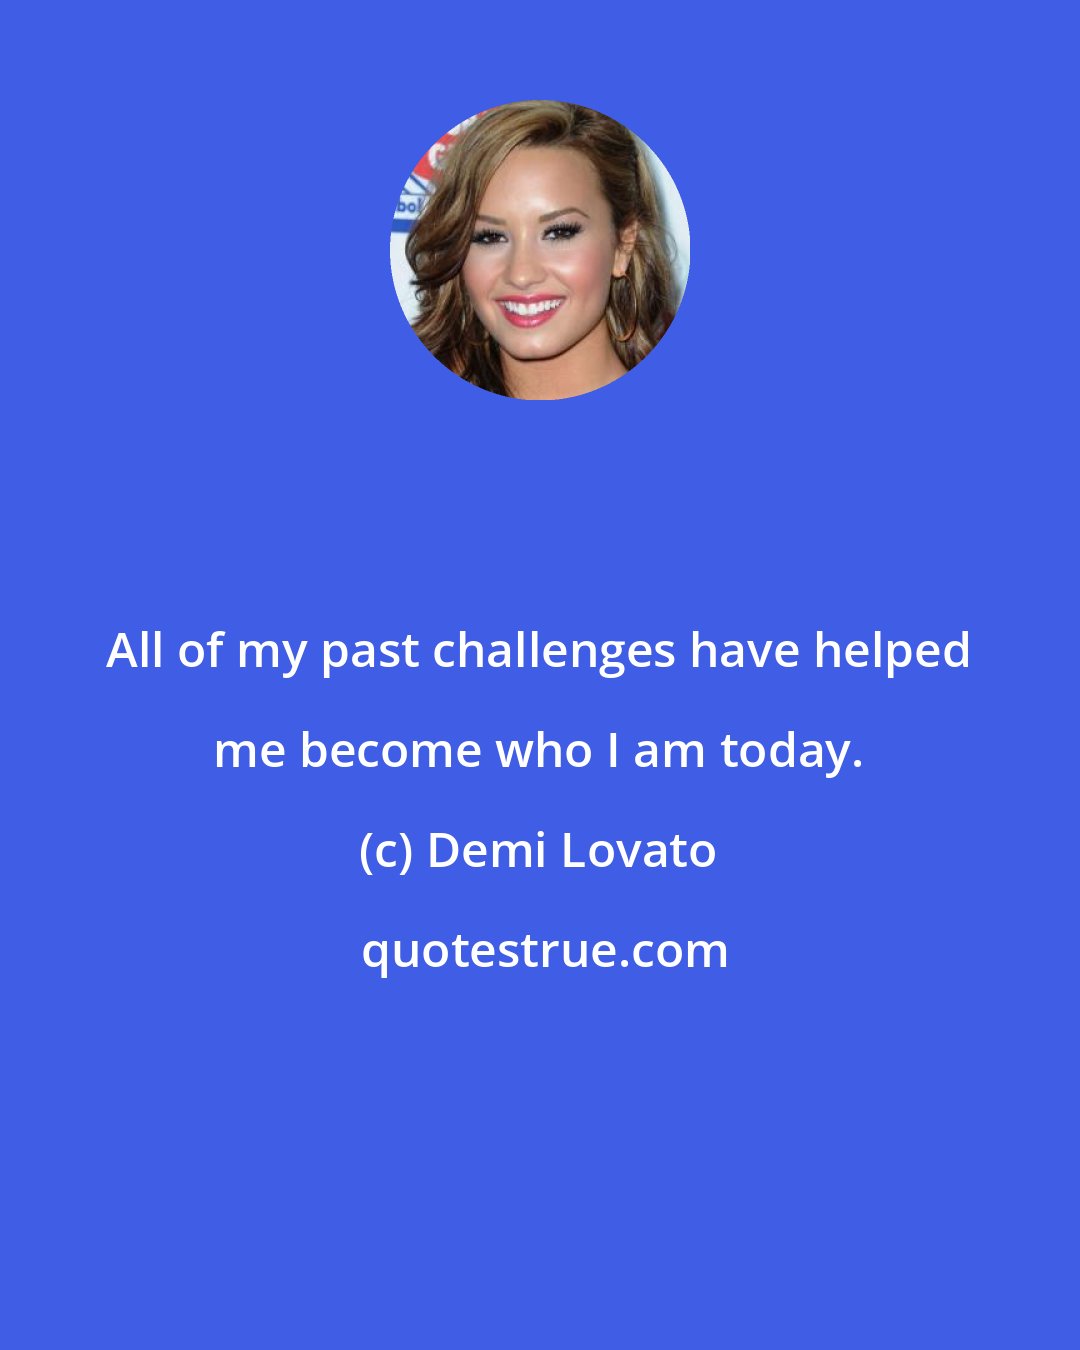 Demi Lovato: All of my past challenges have helped me become who I am today.